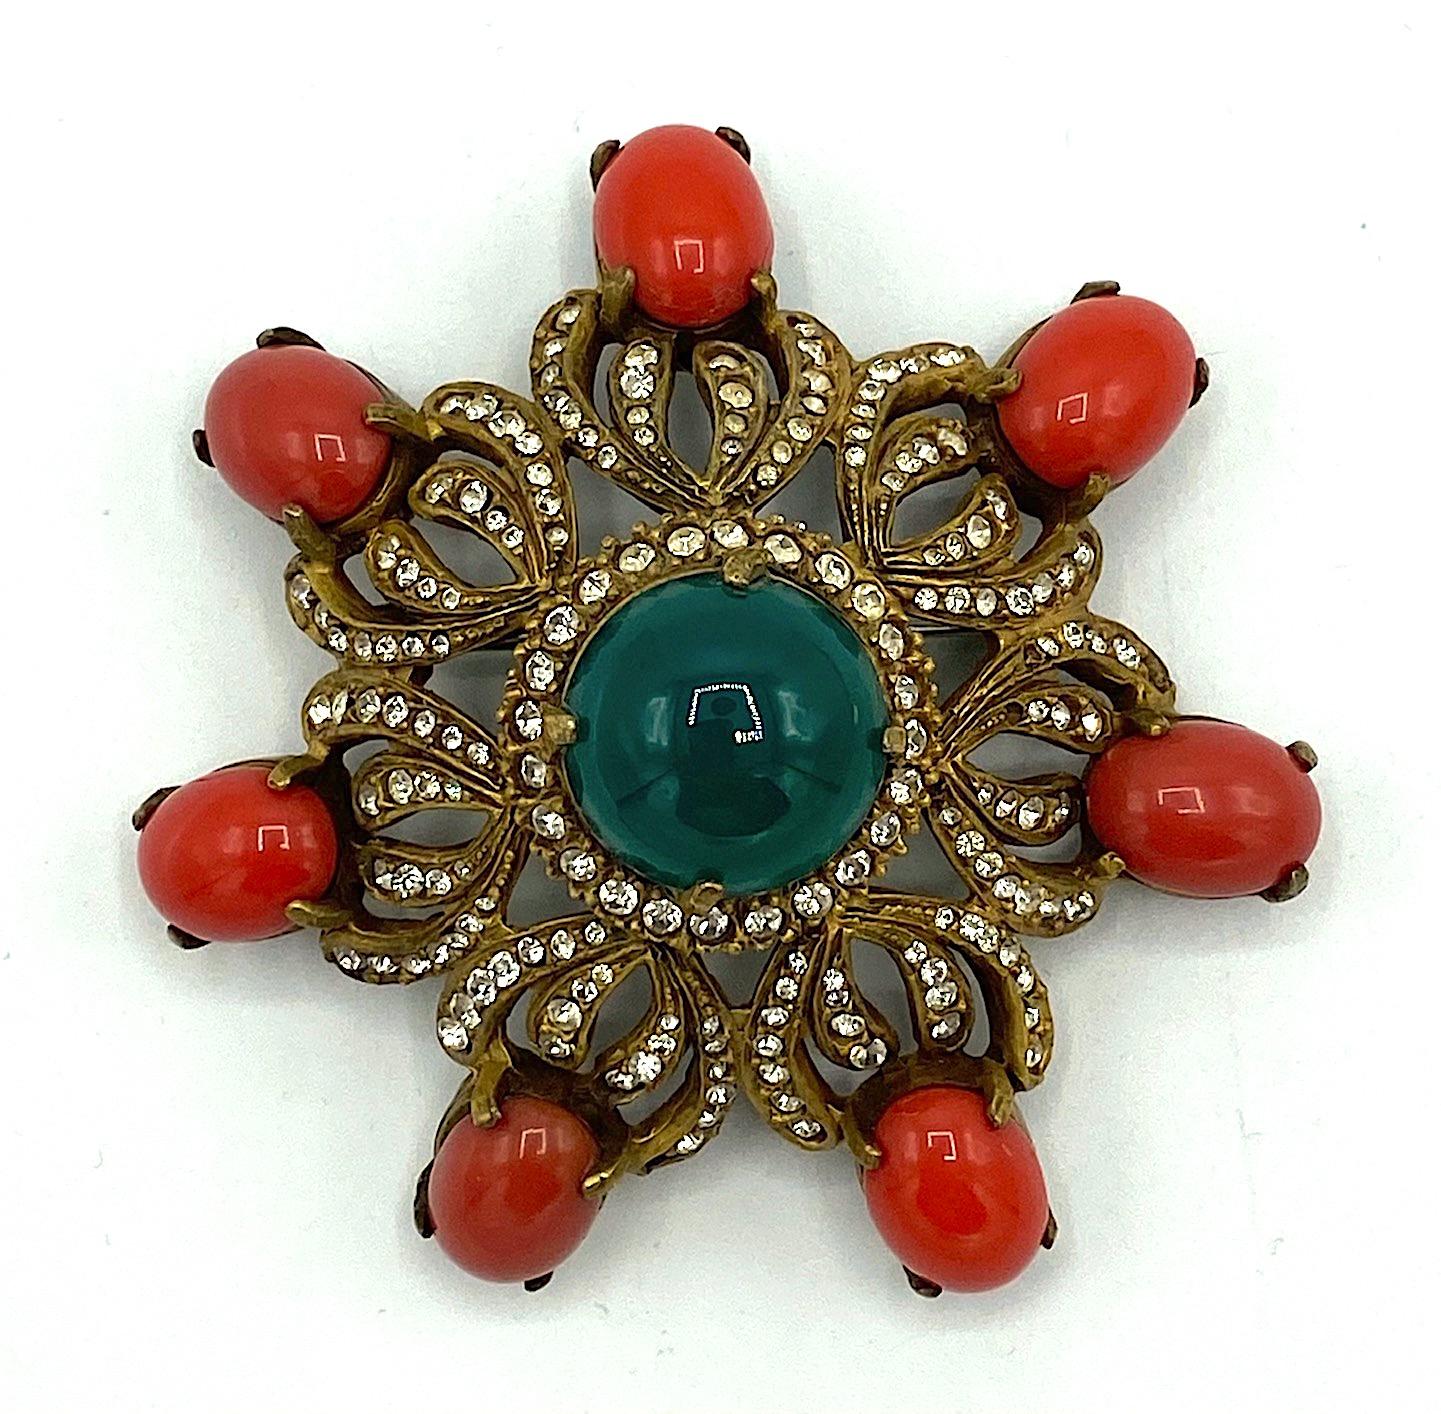 A very rare pair of pre 1973 medallion brooches by Kenneth Jay Lane. They have an openwork and domed design that features a large top emerald green glass cabochon, rhinestone accents and seven oval glass coral color cabochons. Each brooch has a hook